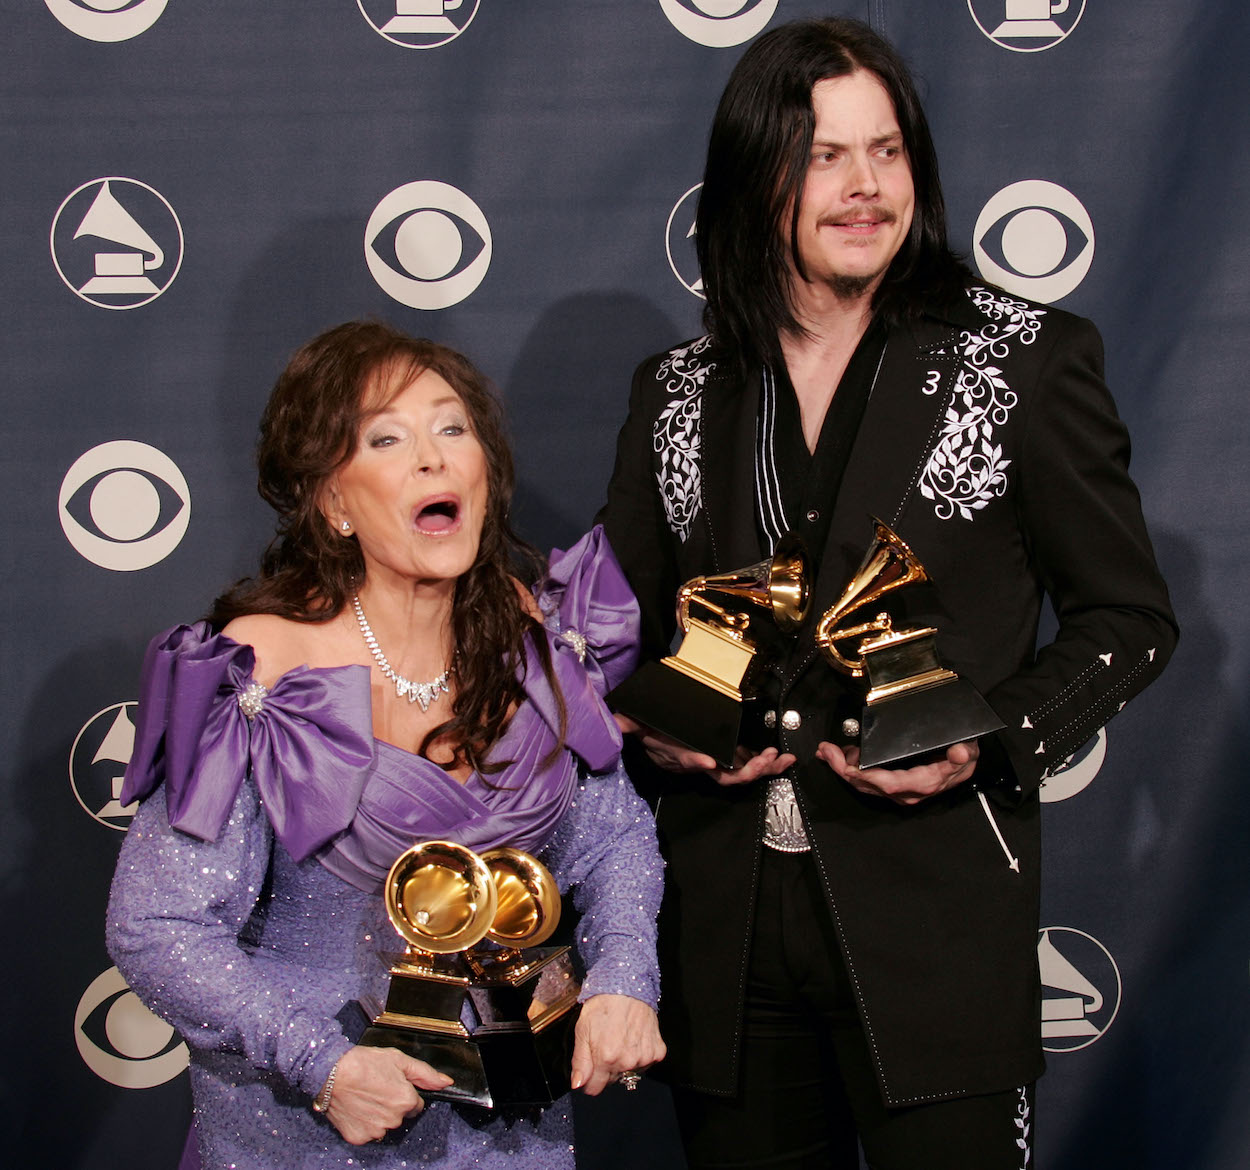 Loretta Lynn (left) holds the two Grammy Awards she won in 2005 while working with Jack White (right).